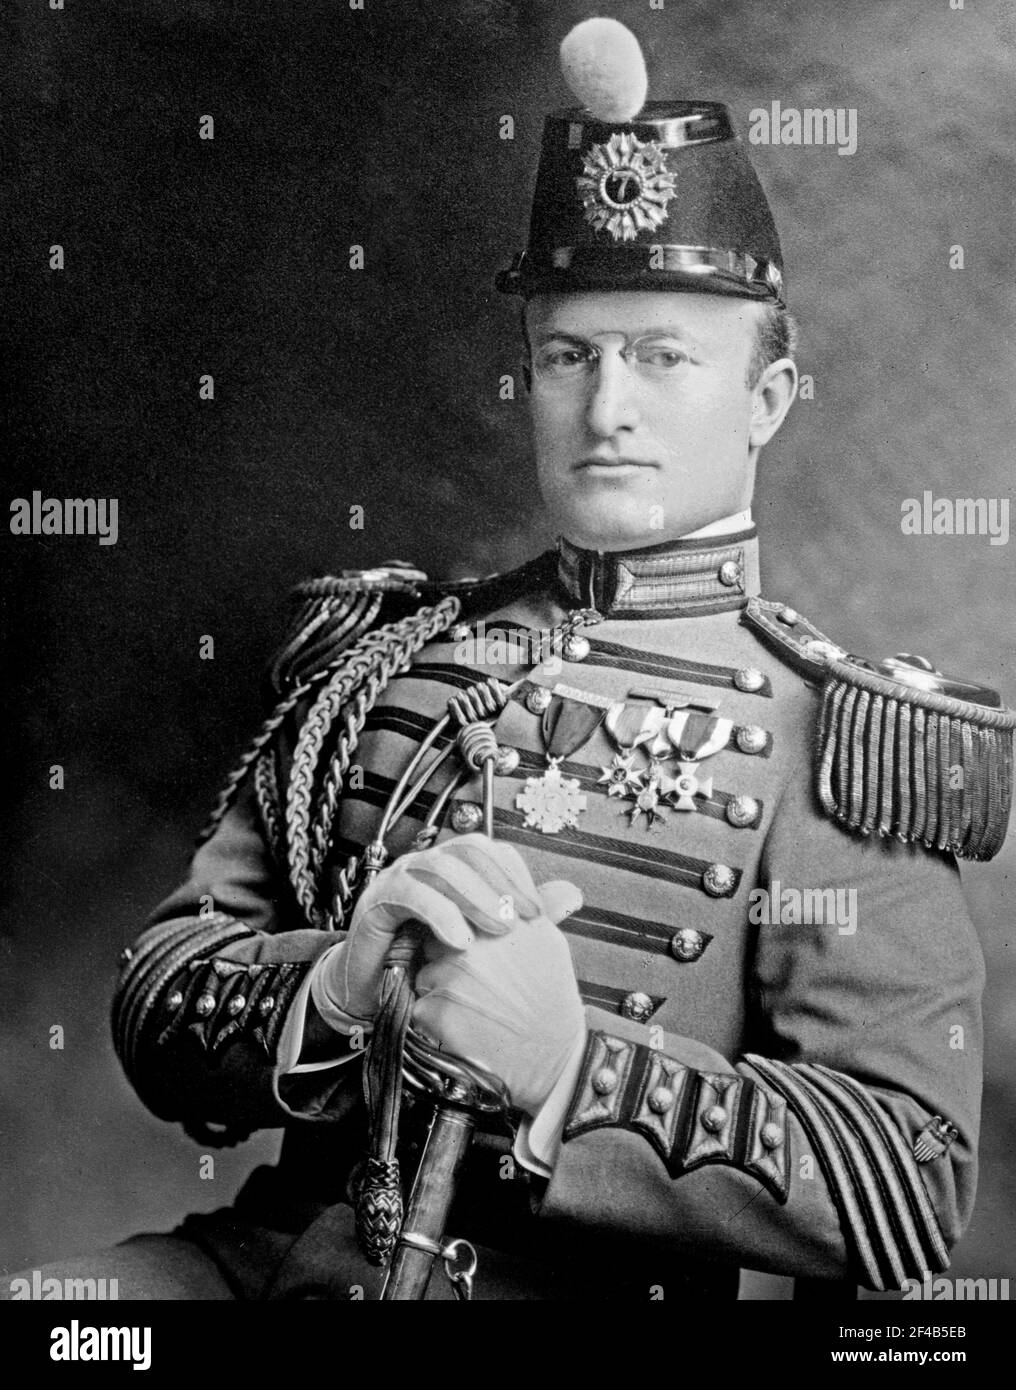 Brigadier General Louis William Stotesbury (1870-1948) who served as Adjutant General of New York  ca. 1910-1915 Stock Photo